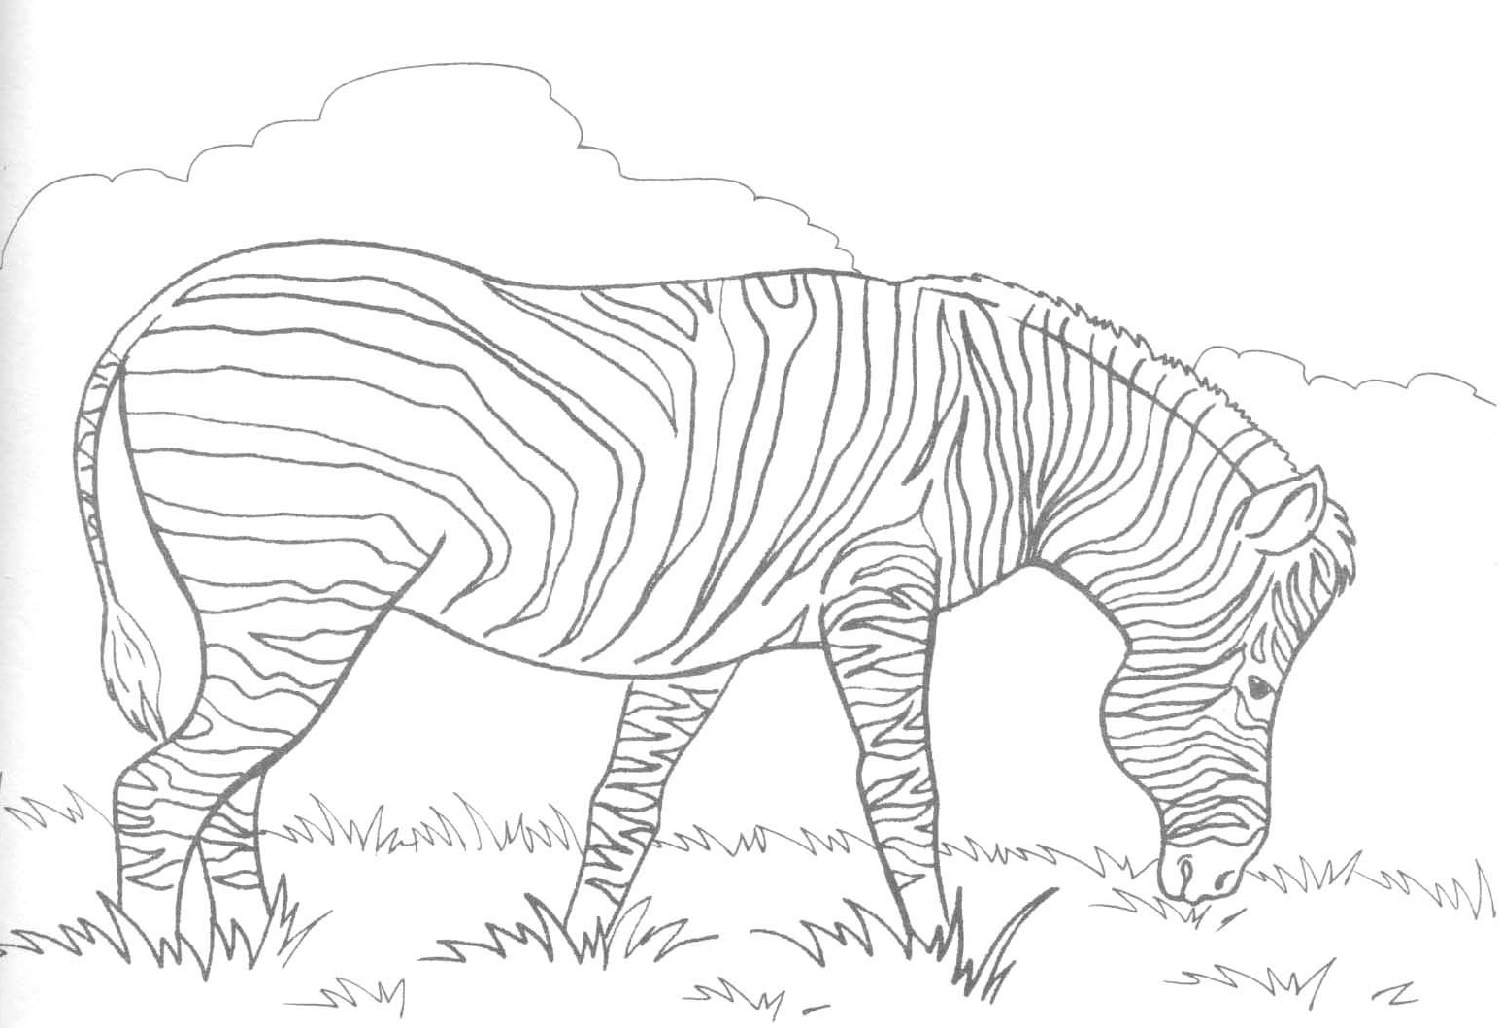 Zebra Coloring Pages Printable